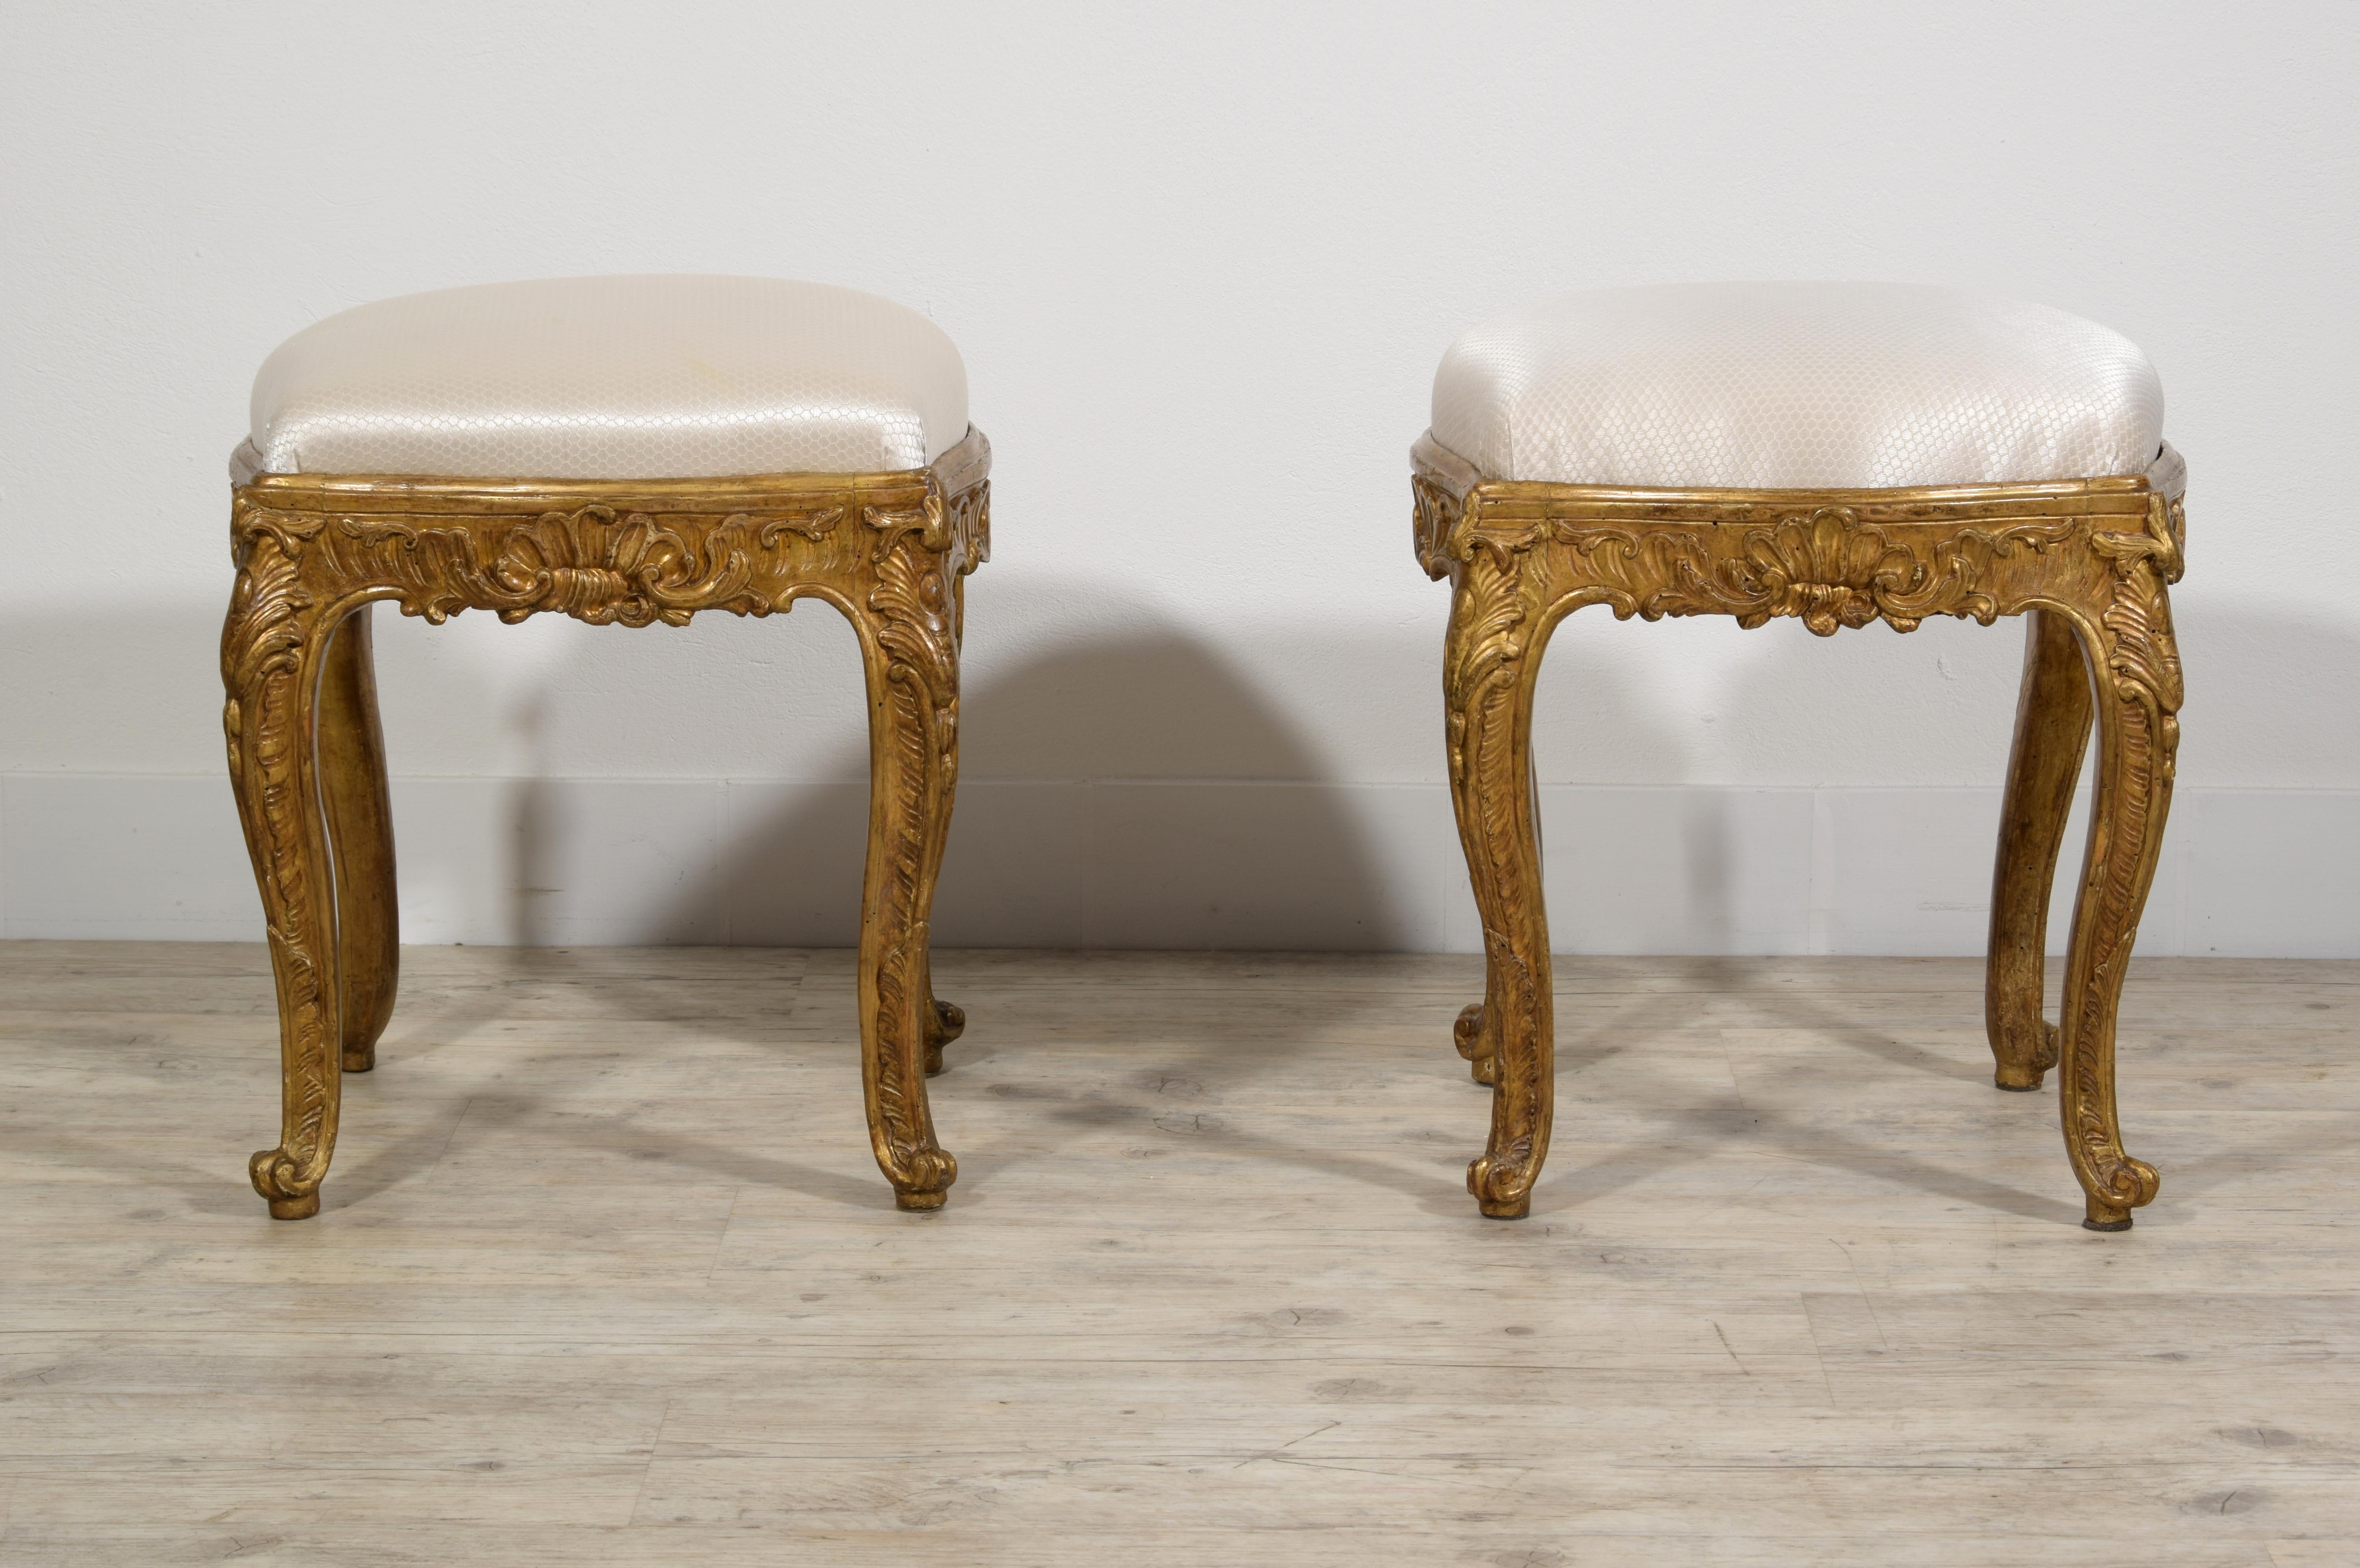 18th Century, Italian Pair of Gilt Wood Louis XV Stools 
This fine pair of stools was made in Naples, Italy, around the middle of the eighteenth century, in the Louis XV era.
Each stool is carved in wood and has bands and legs moved and arched,